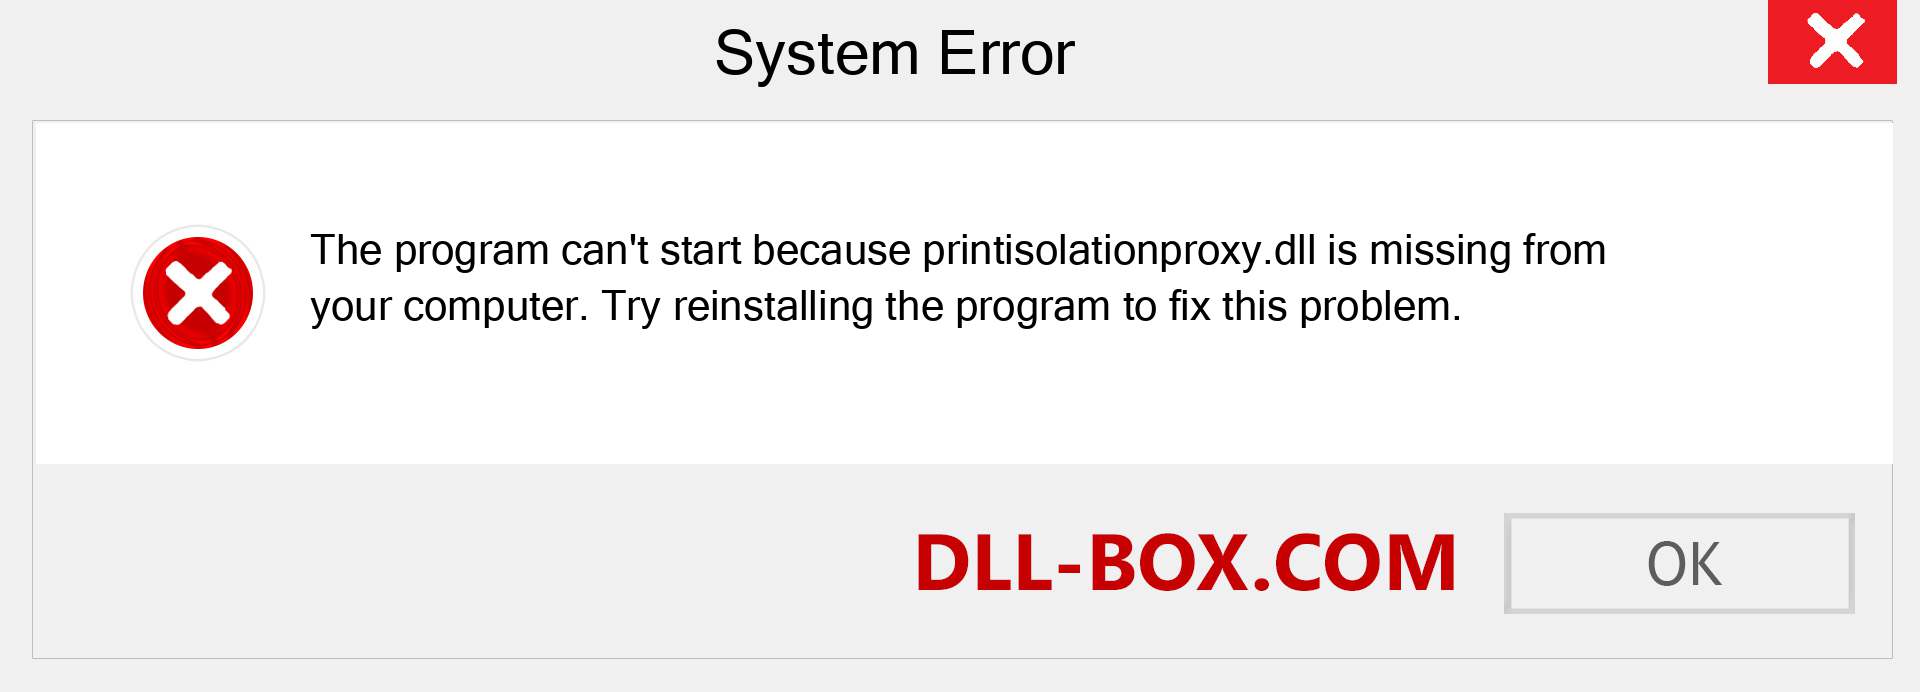  printisolationproxy.dll file is missing?. Download for Windows 7, 8, 10 - Fix  printisolationproxy dll Missing Error on Windows, photos, images